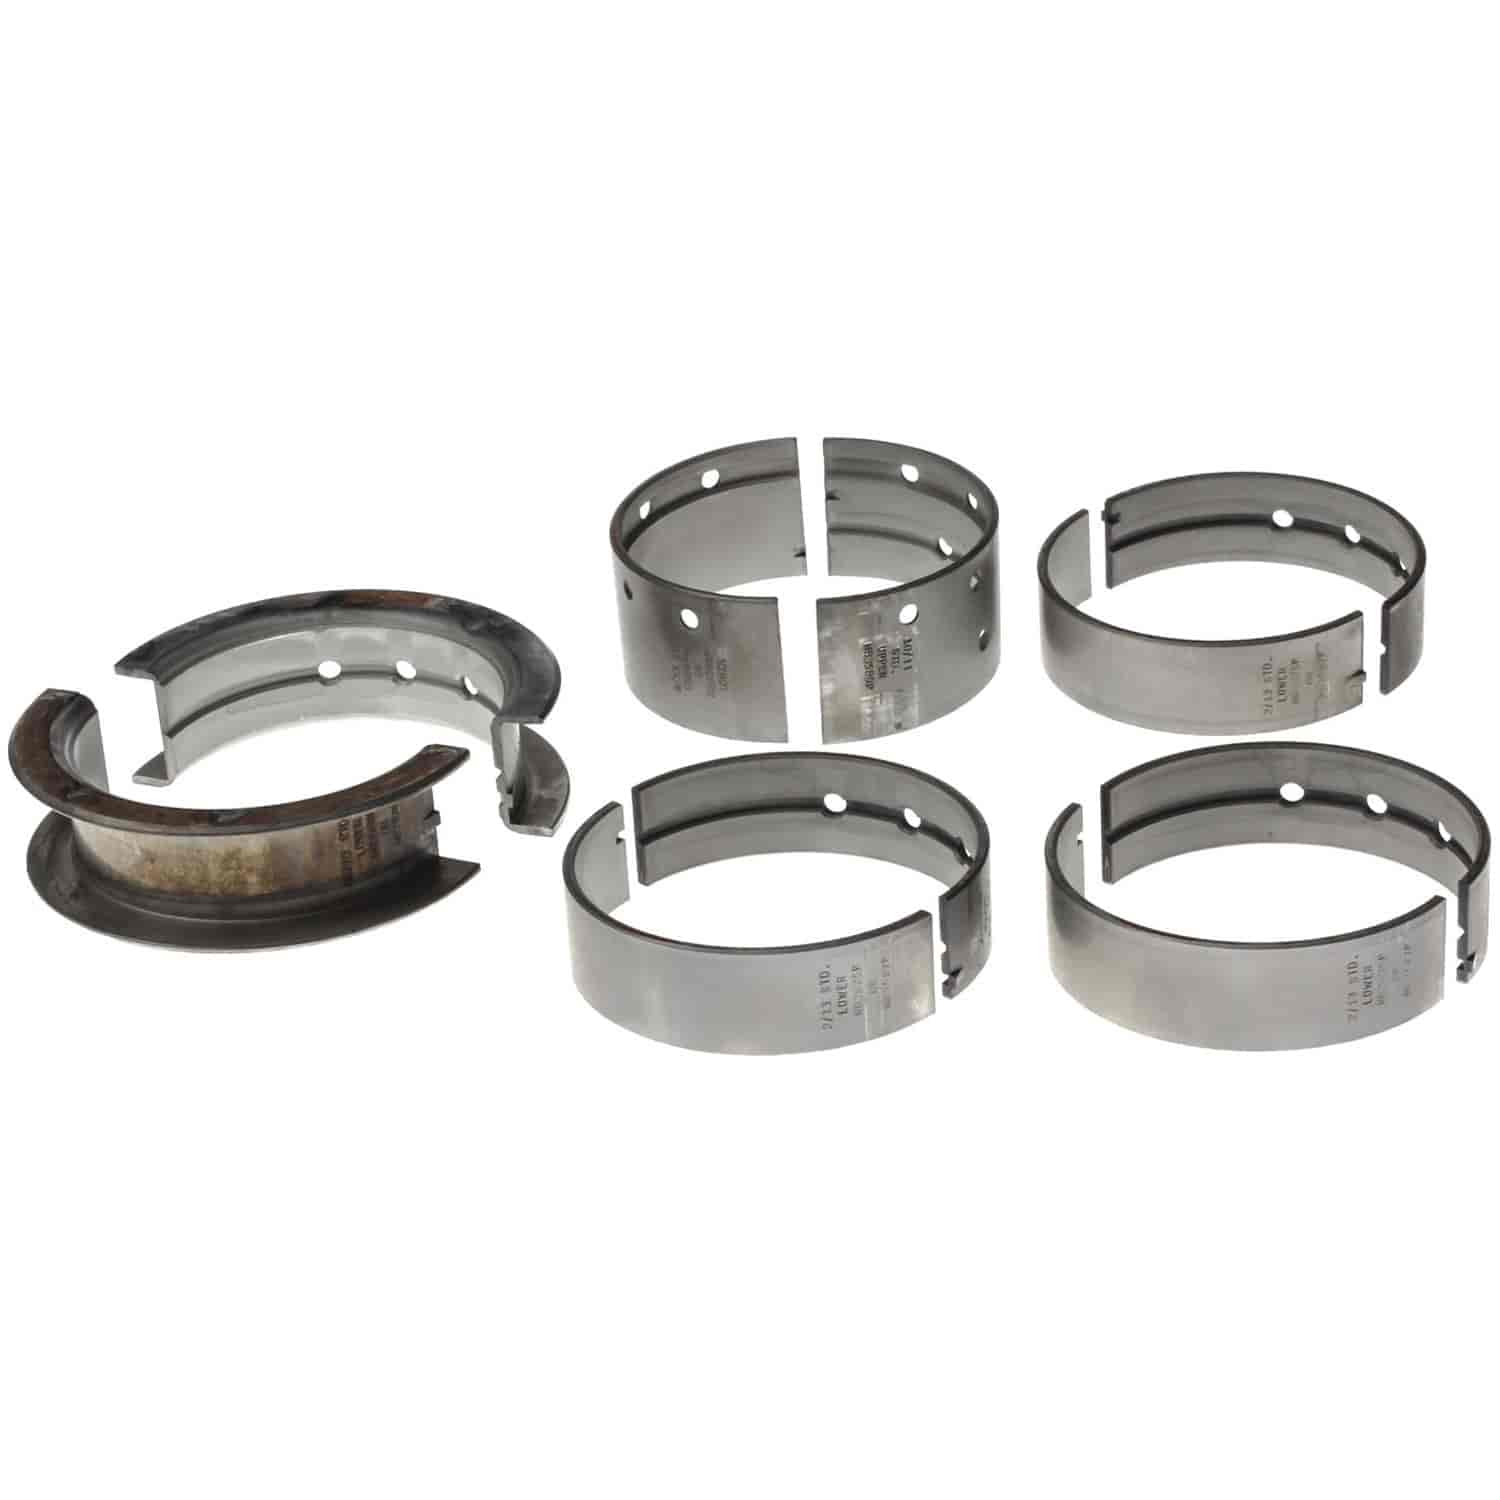 Main Bearing Set Chevy/GMC 1982-2002 V8 6.2/6.5L Diesel with -.026mm Undersize